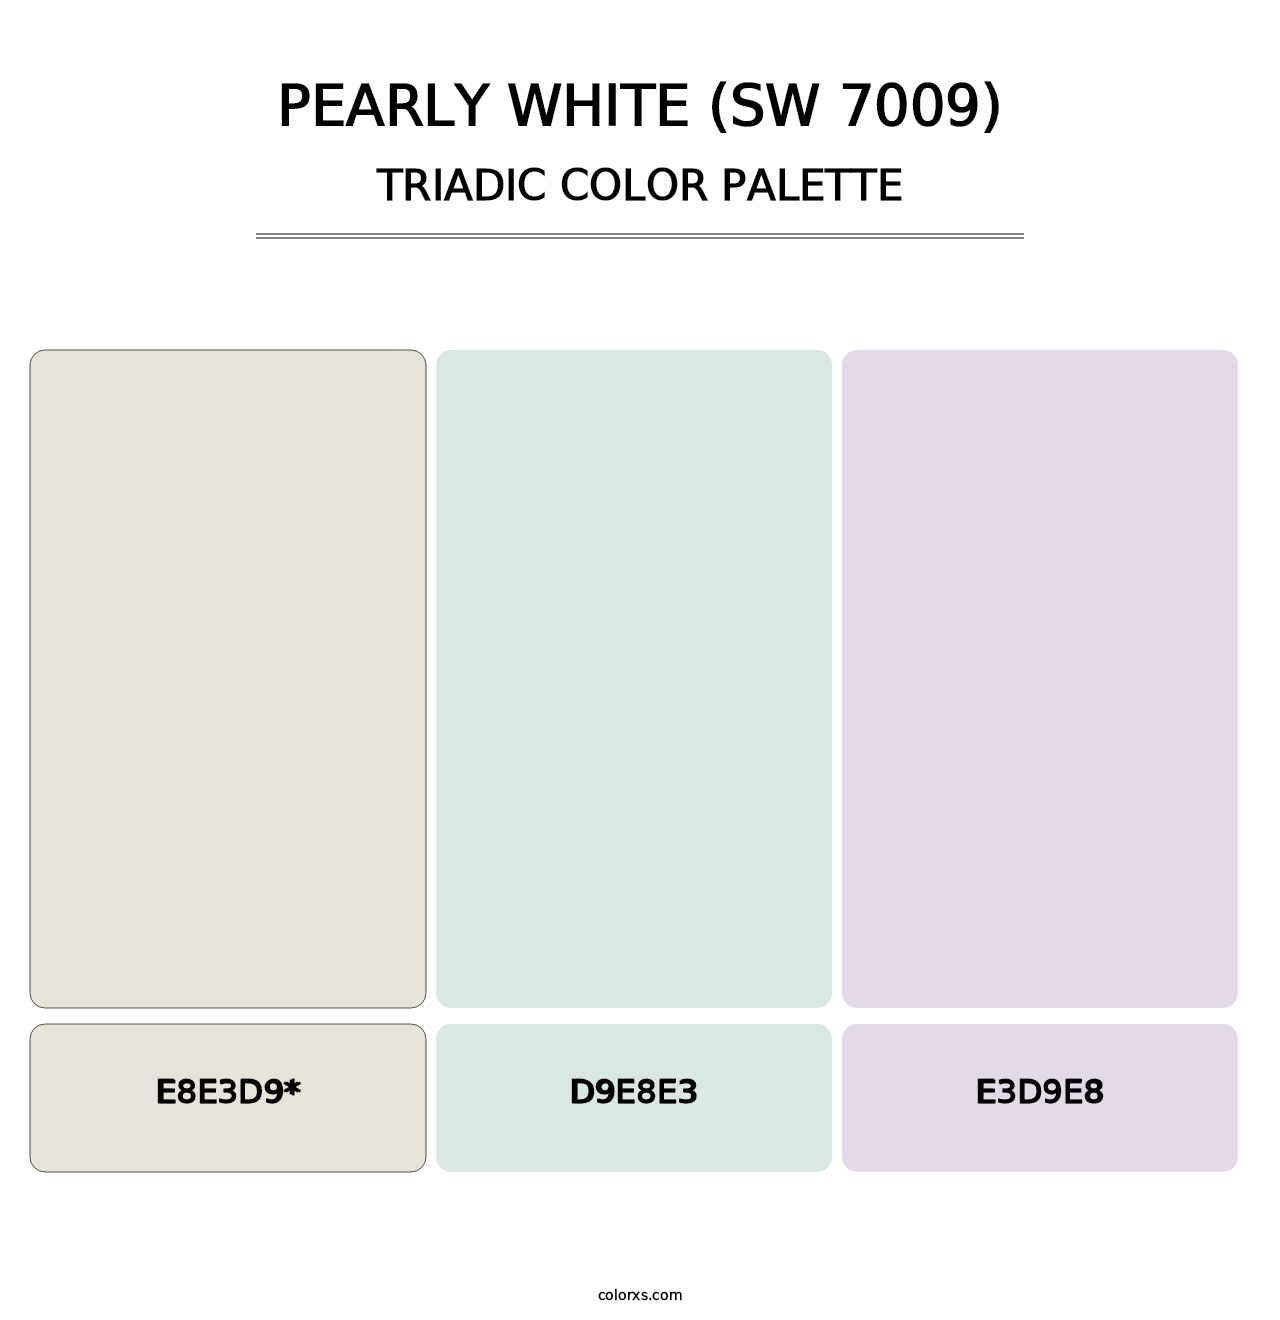 Pearly White (SW 7009) - Triadic Color Palette